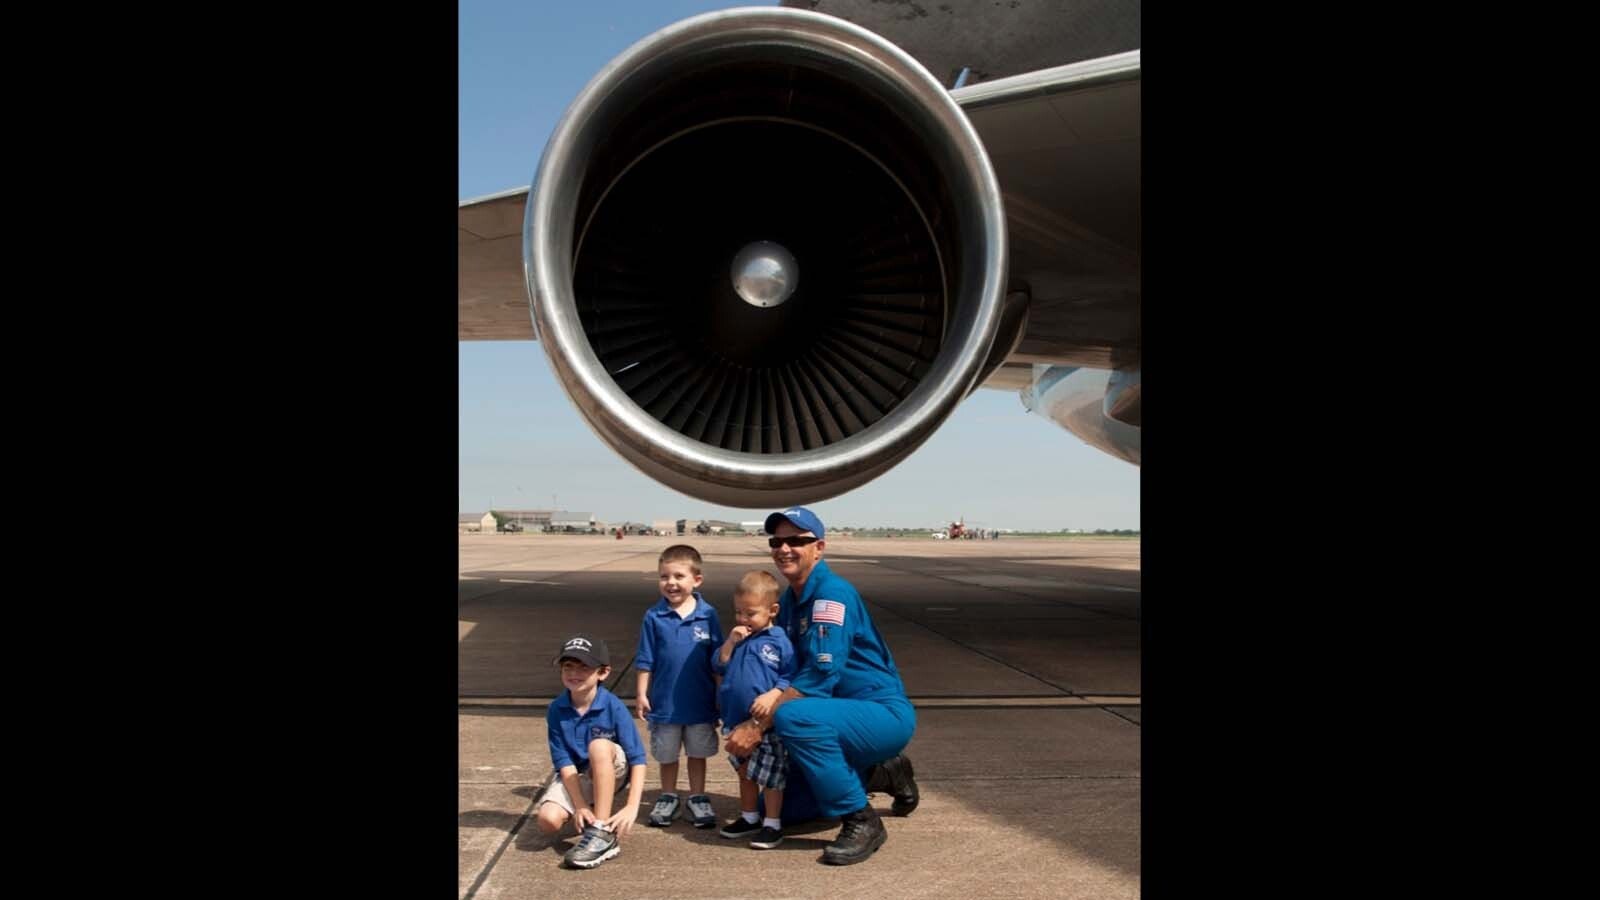 Larry LaRose at Ellington Field in Houston with grandsons Matt, Cody and Paco.